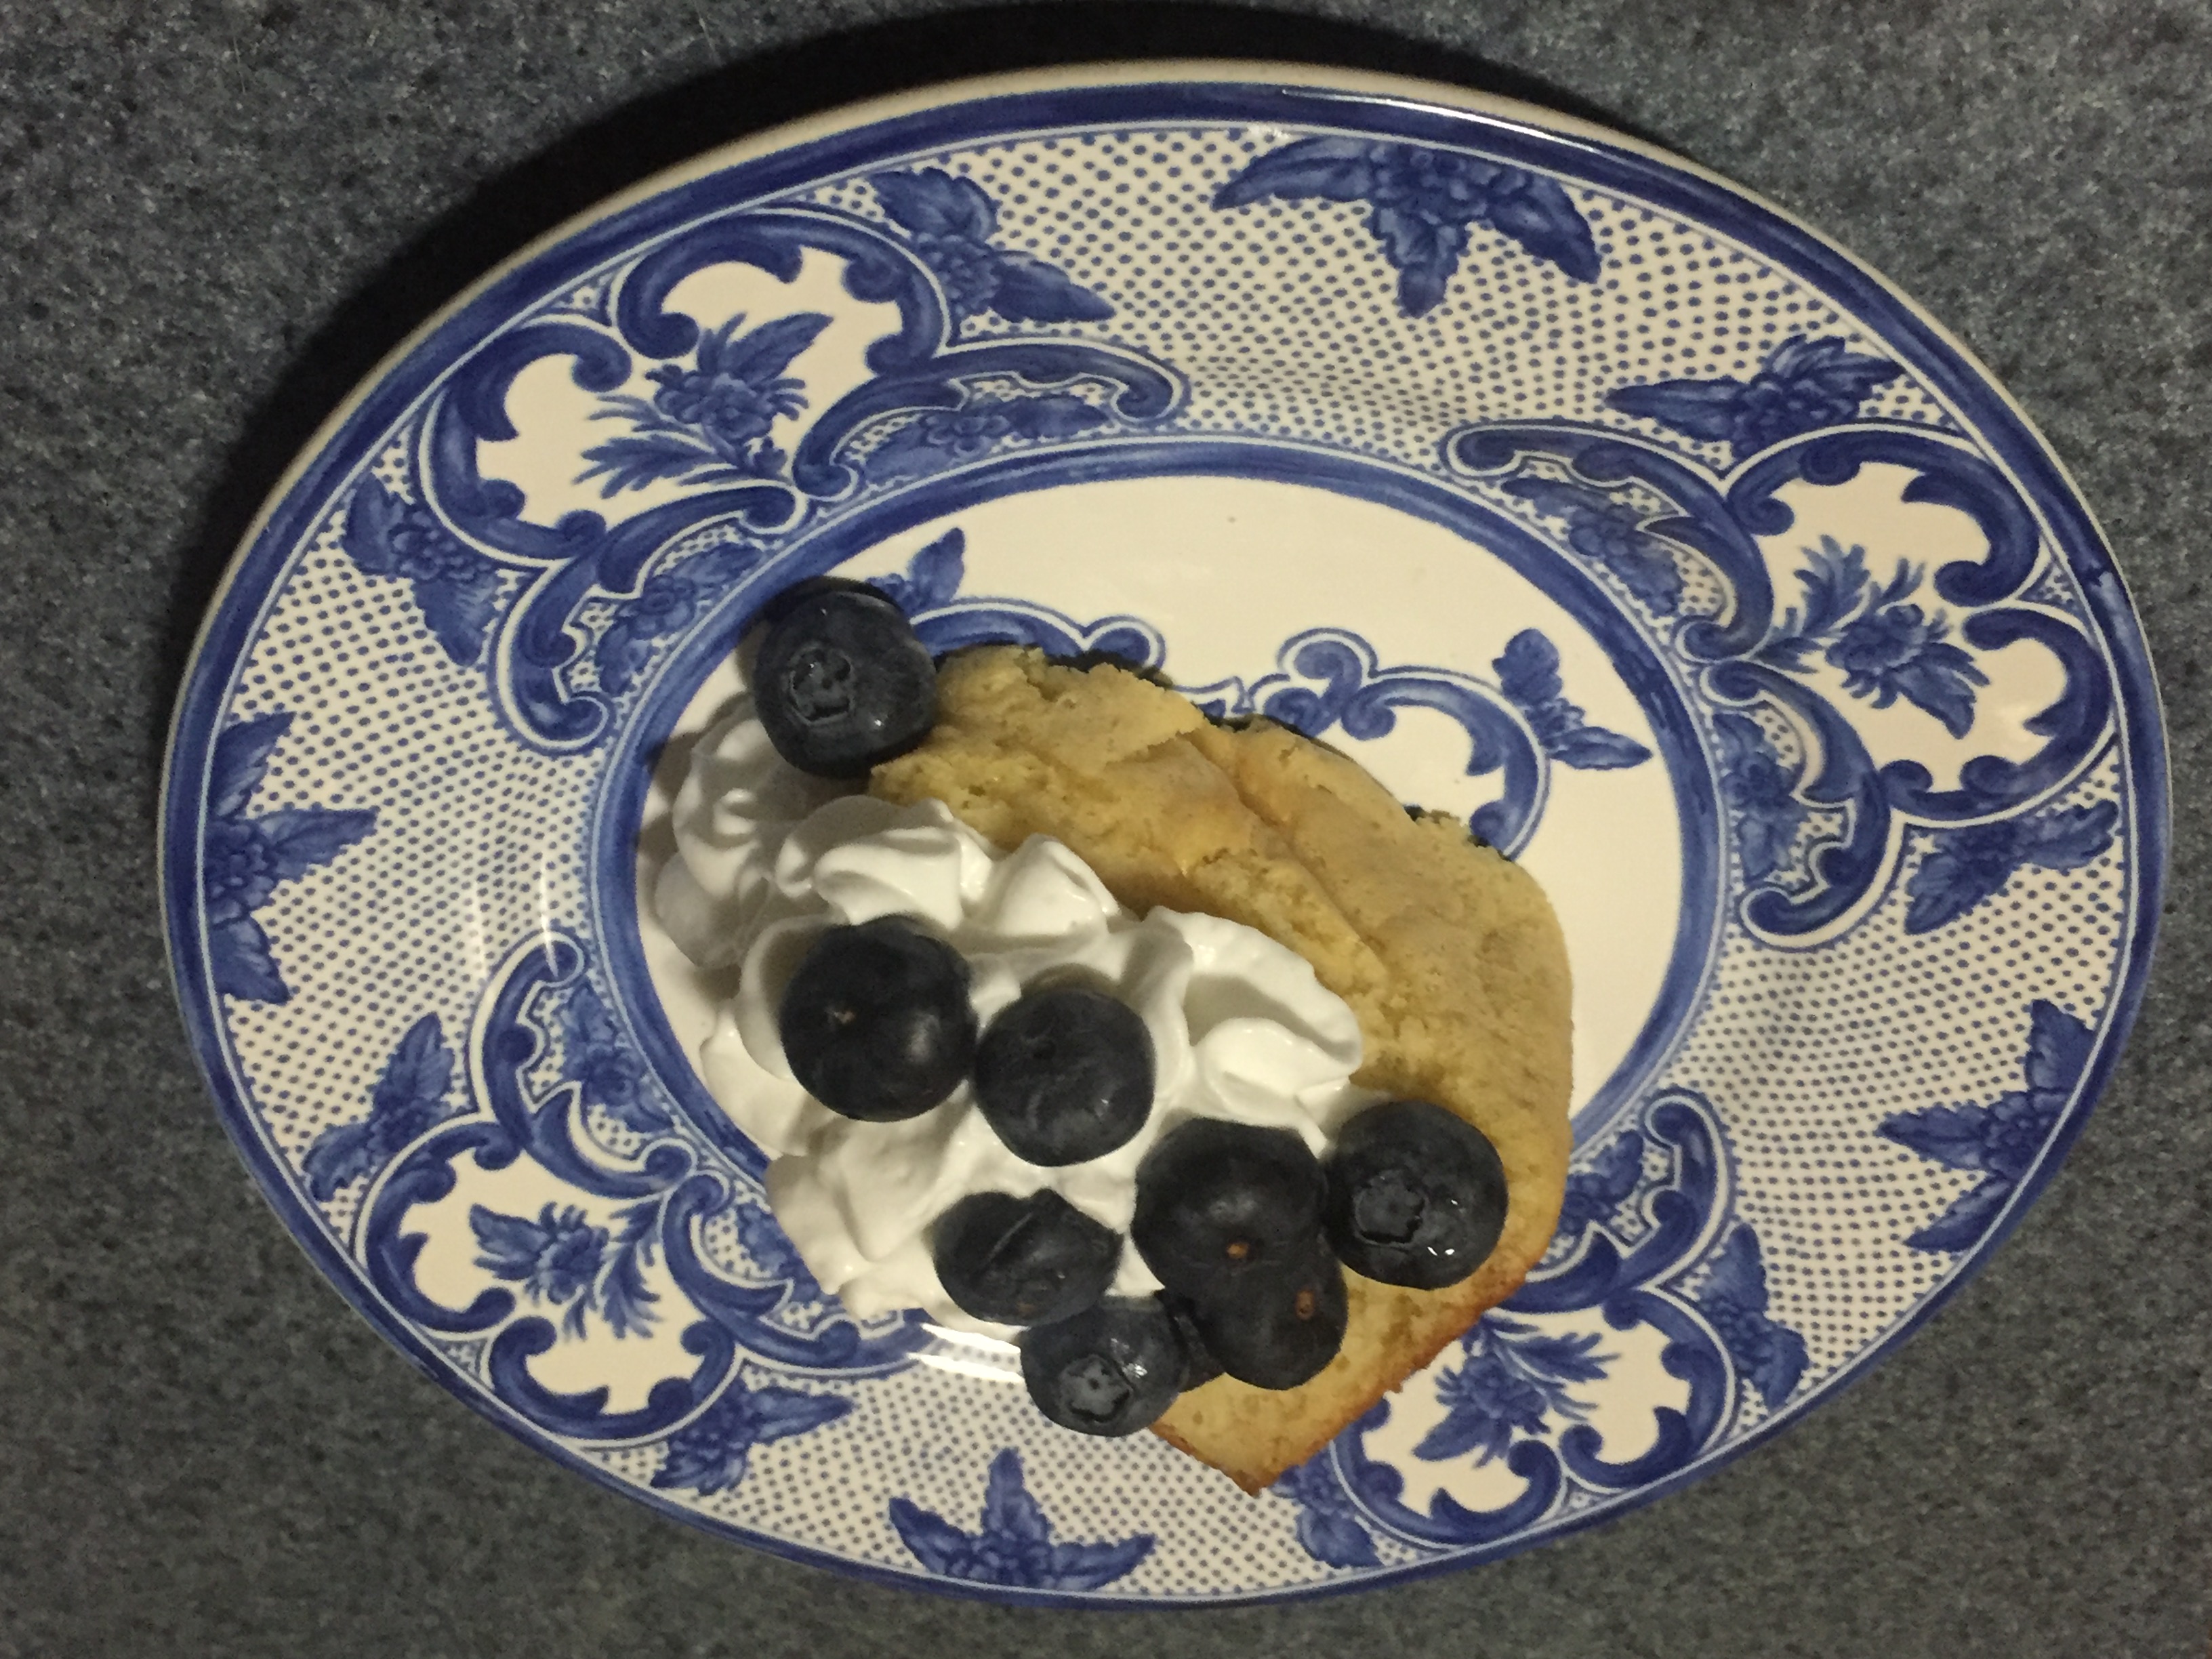 A slice of yellow sponge cake topped with whipped cream and blueberries on a blue and white china plate.